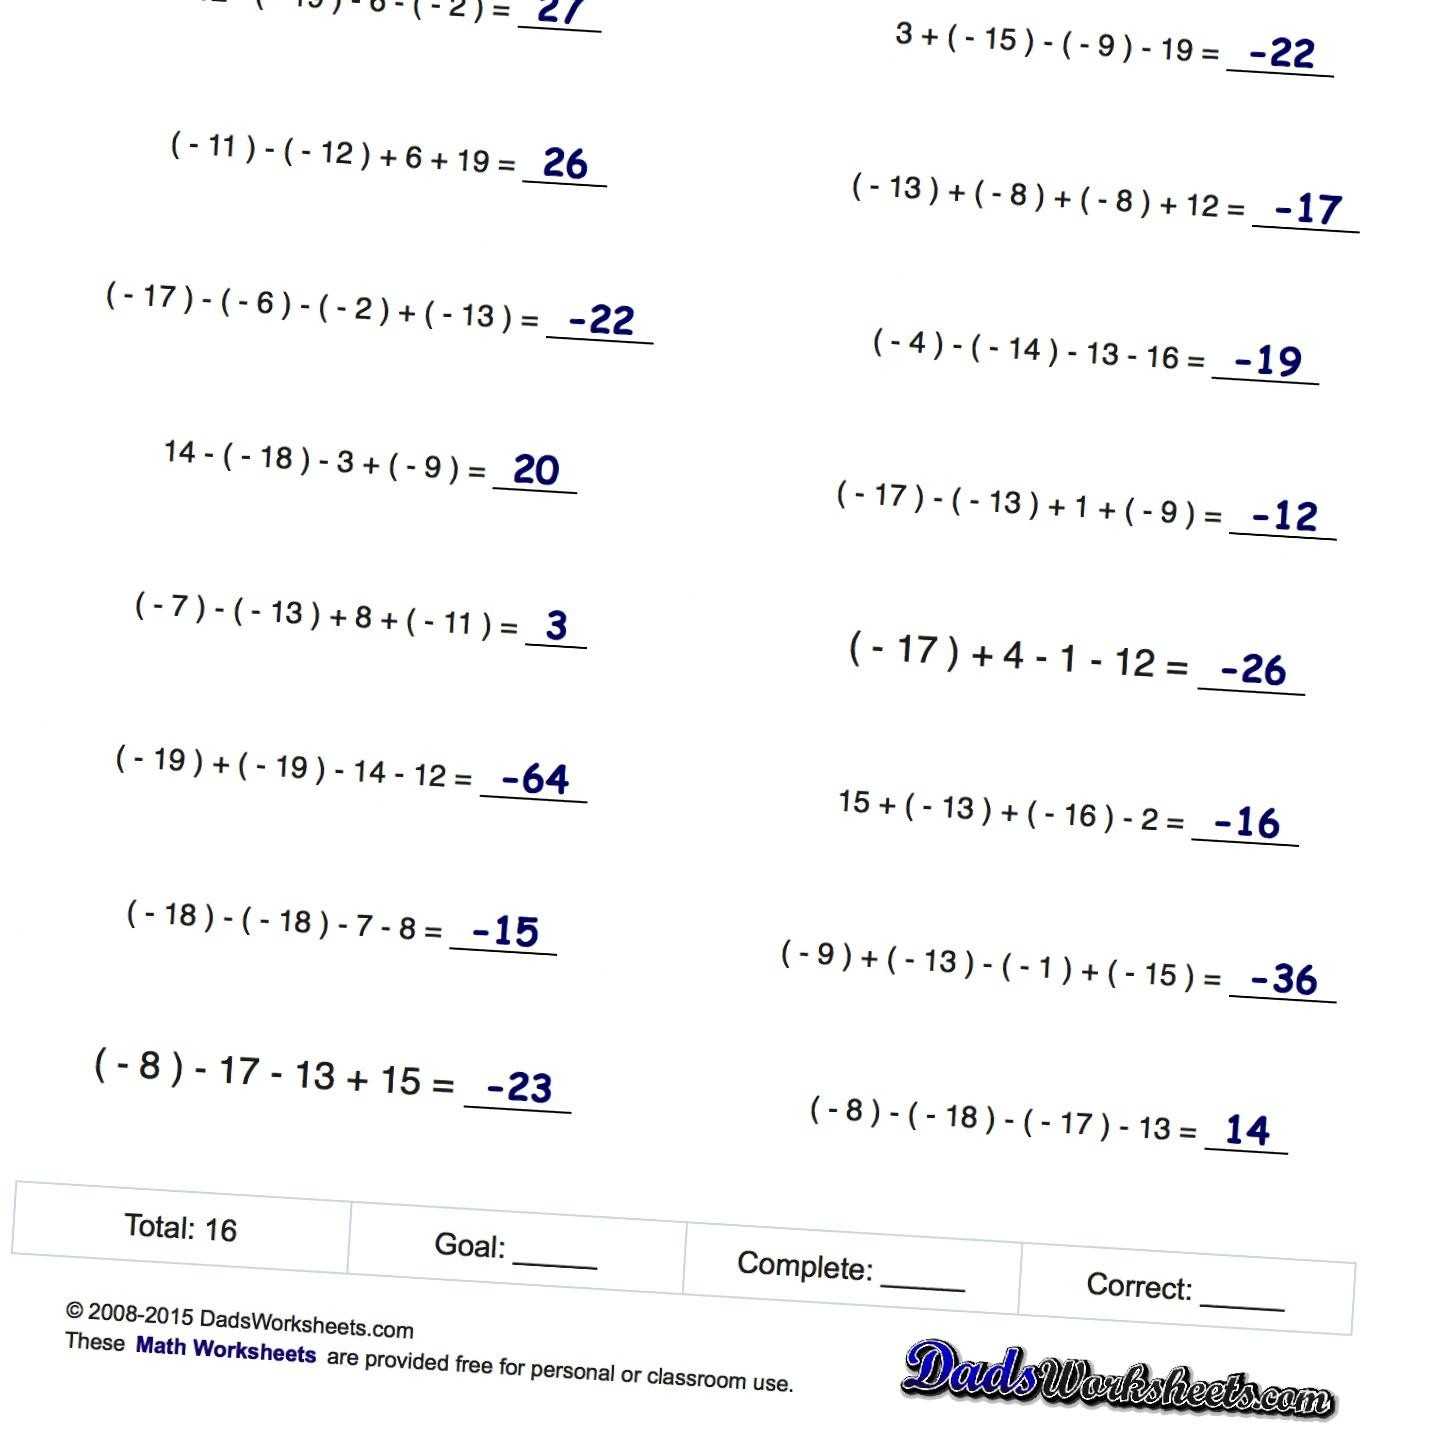 Adding and Subtracting Integers Word Problems Worksheet Also Math Worksheets for Numbers 11 15 New Math Worksheets for Negative